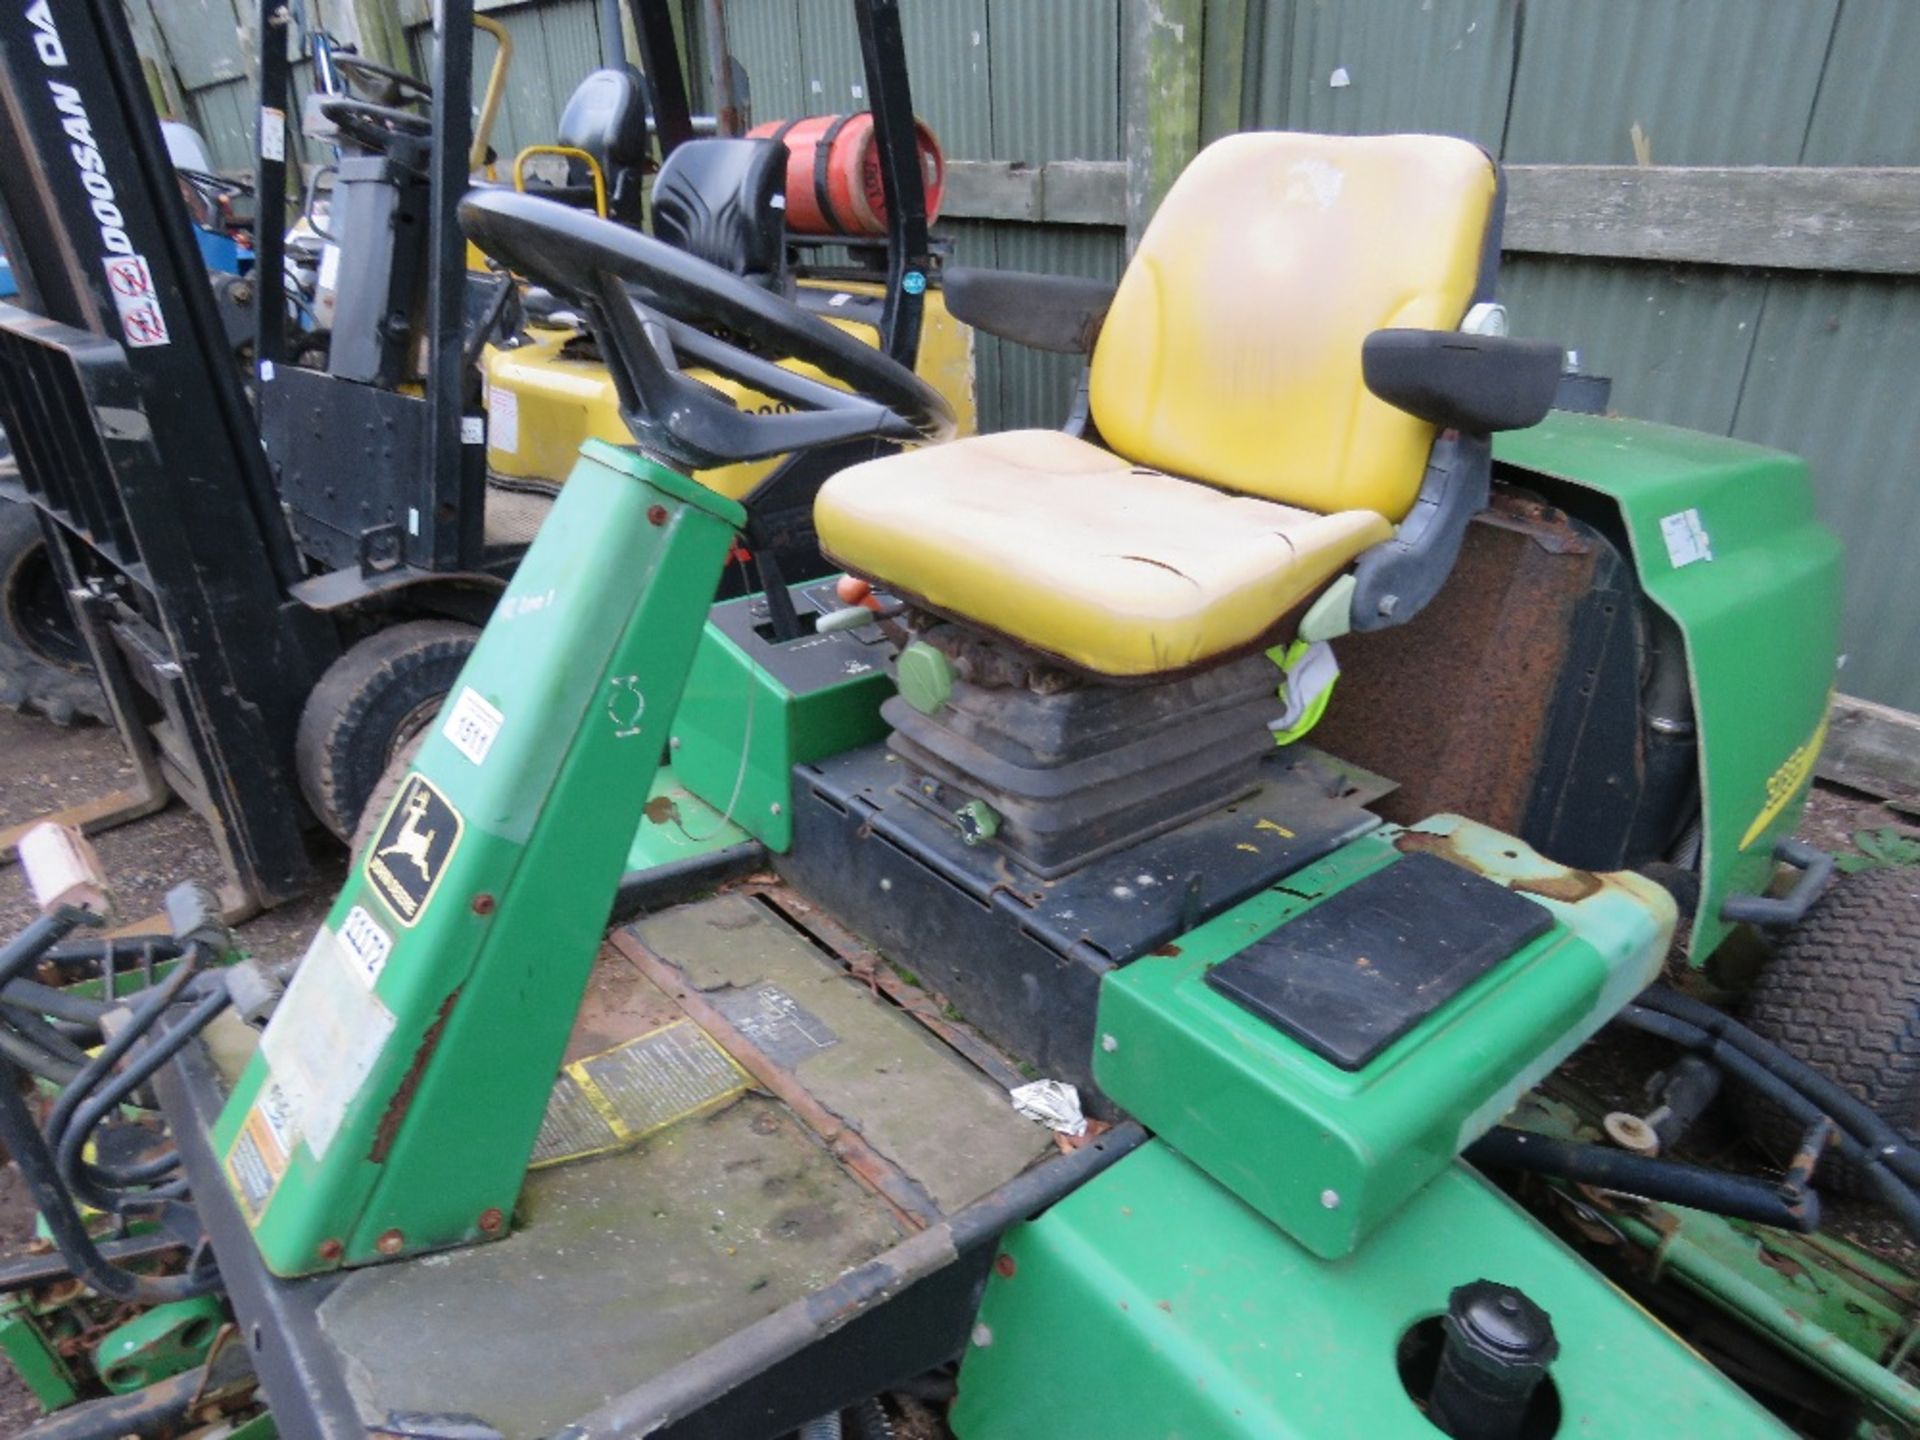 JOHN DEERE 3235B 5 GANG CYLINDER MOWER, YEAR 2001 APPROX. WHEN TESTED WAS SEEN TO RUN, DRIVE AND MOW - Image 10 of 11